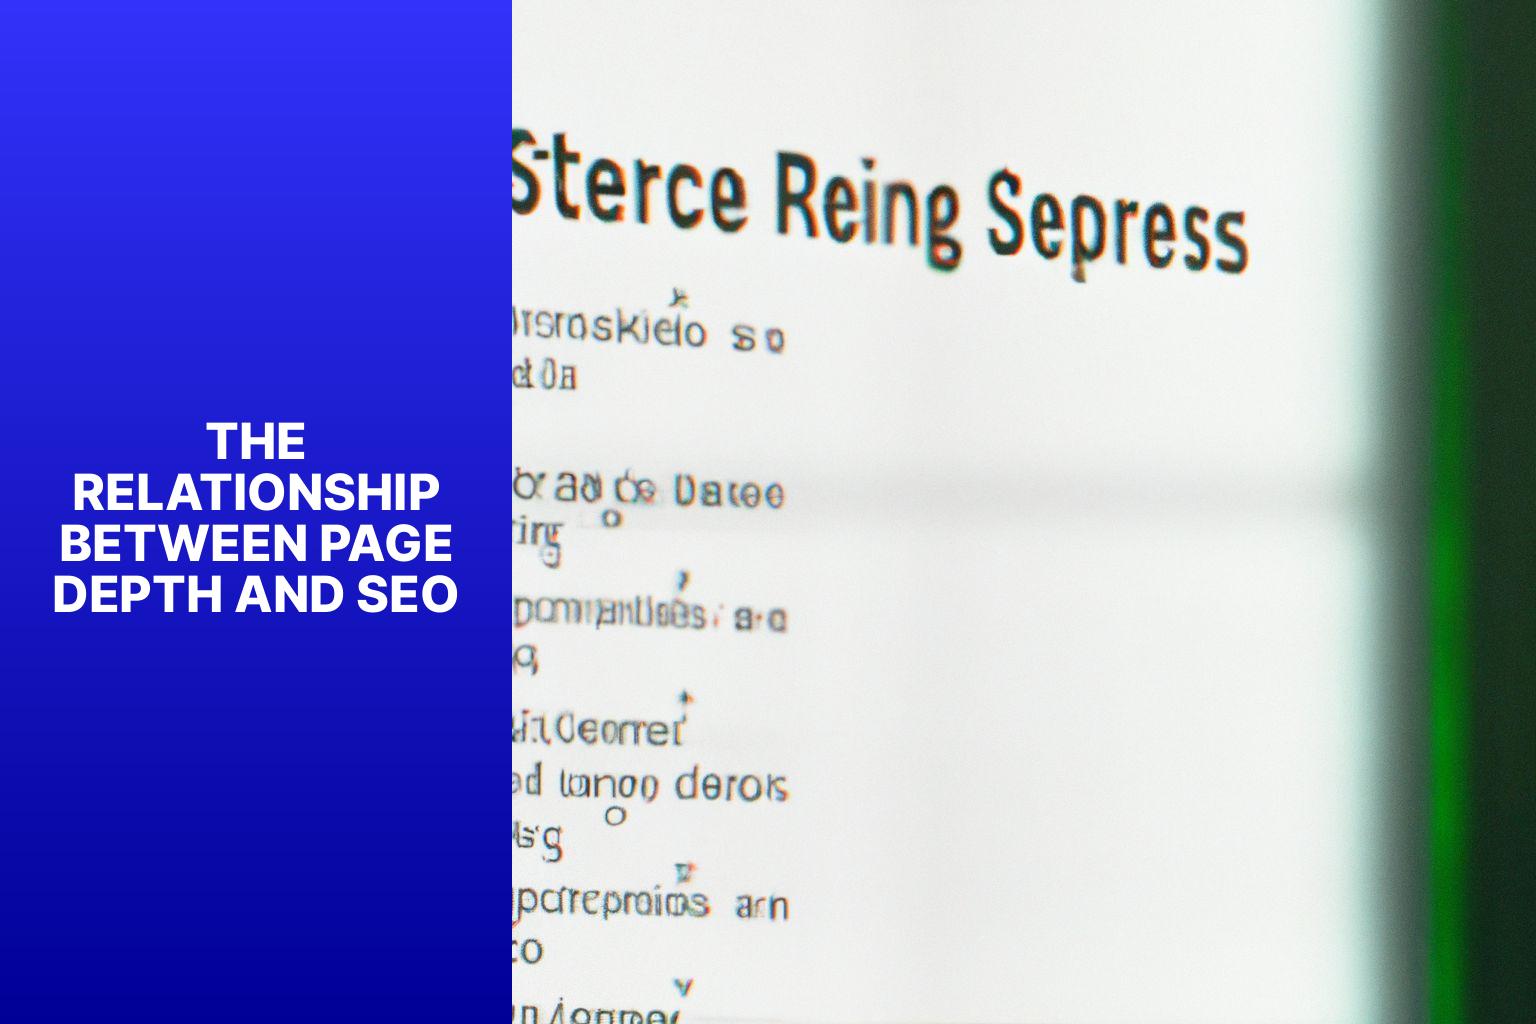 The Relationship Between Page Depth and SEO